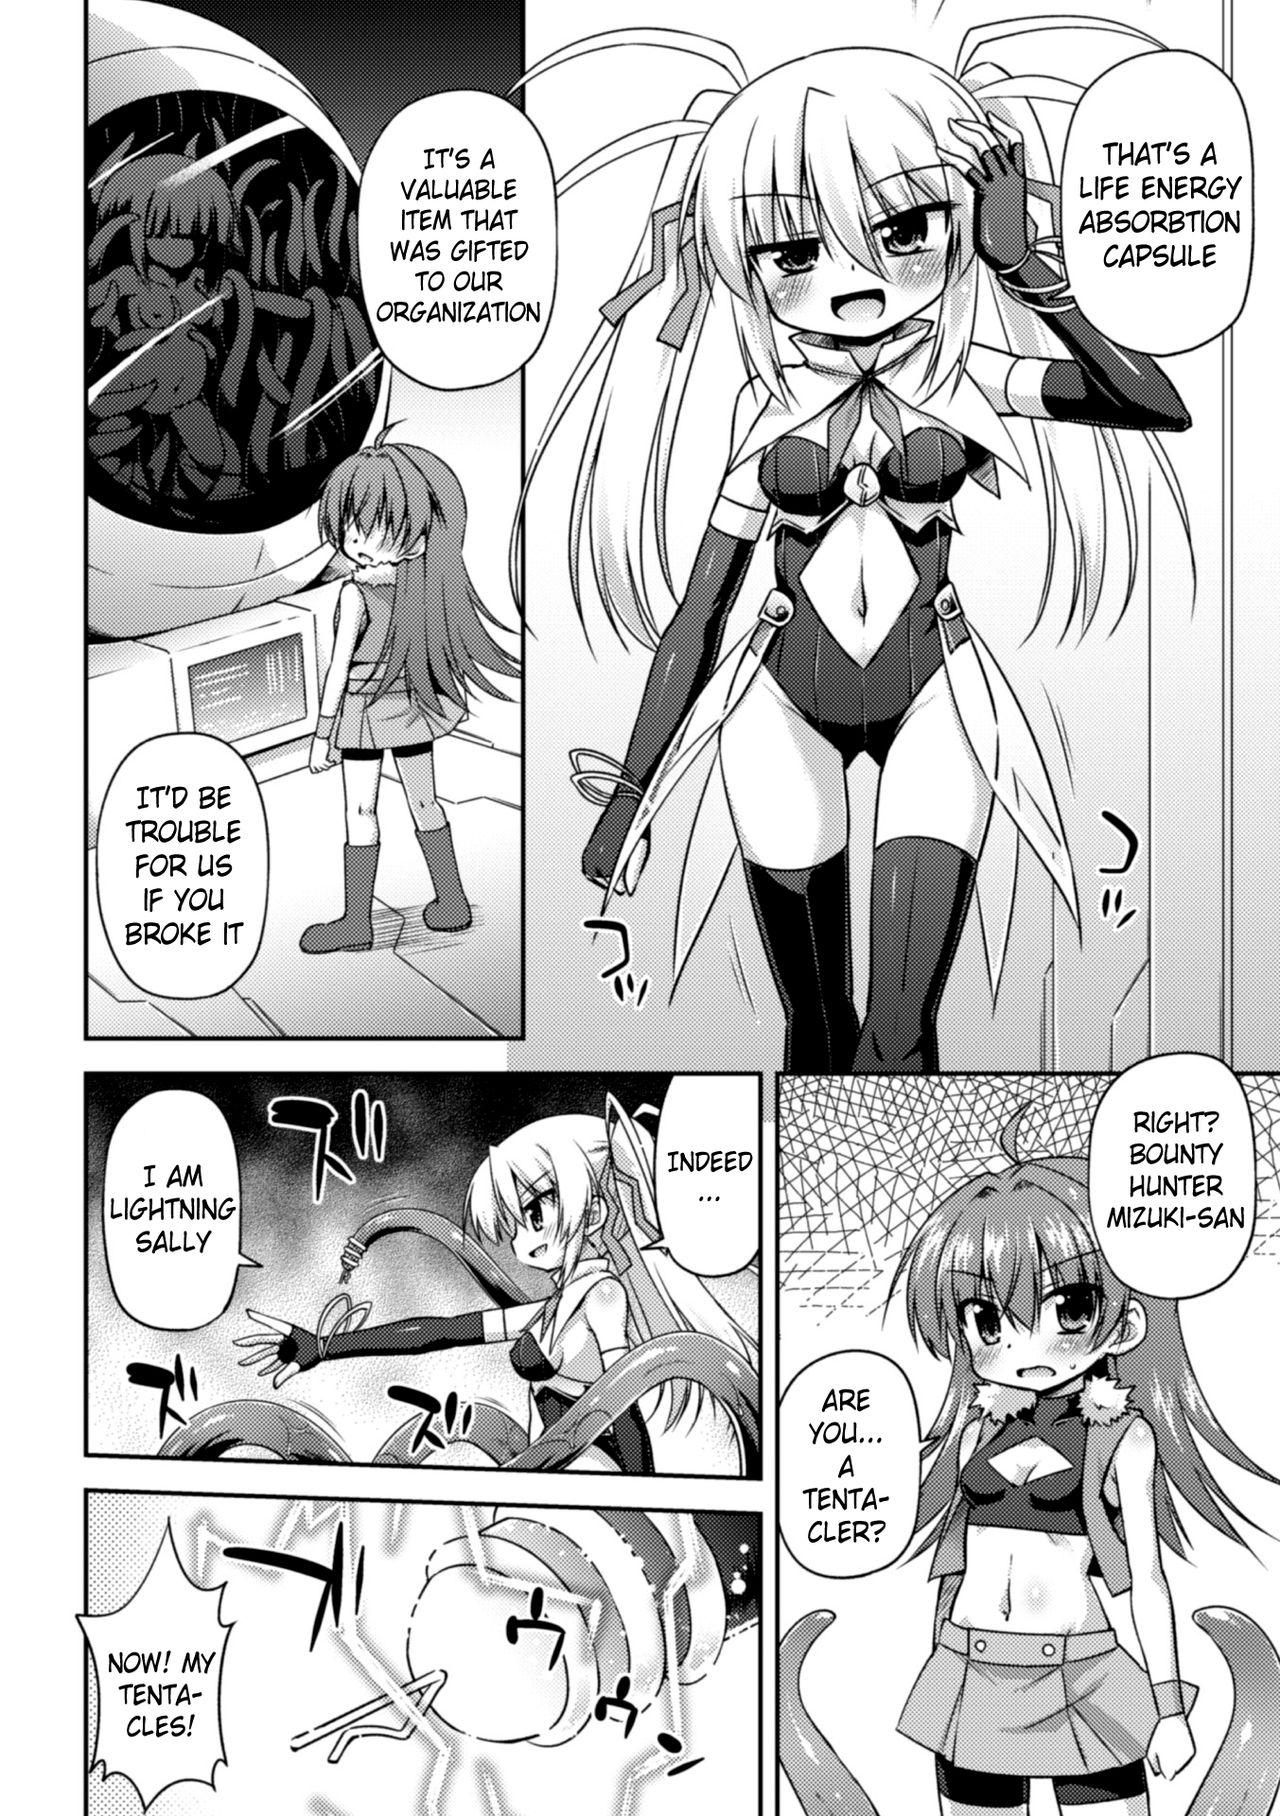 Gay Masturbation Konoyo wa Subete Tentacle! | This World is all Tentacles! Best Blowjob Ever - Page 8